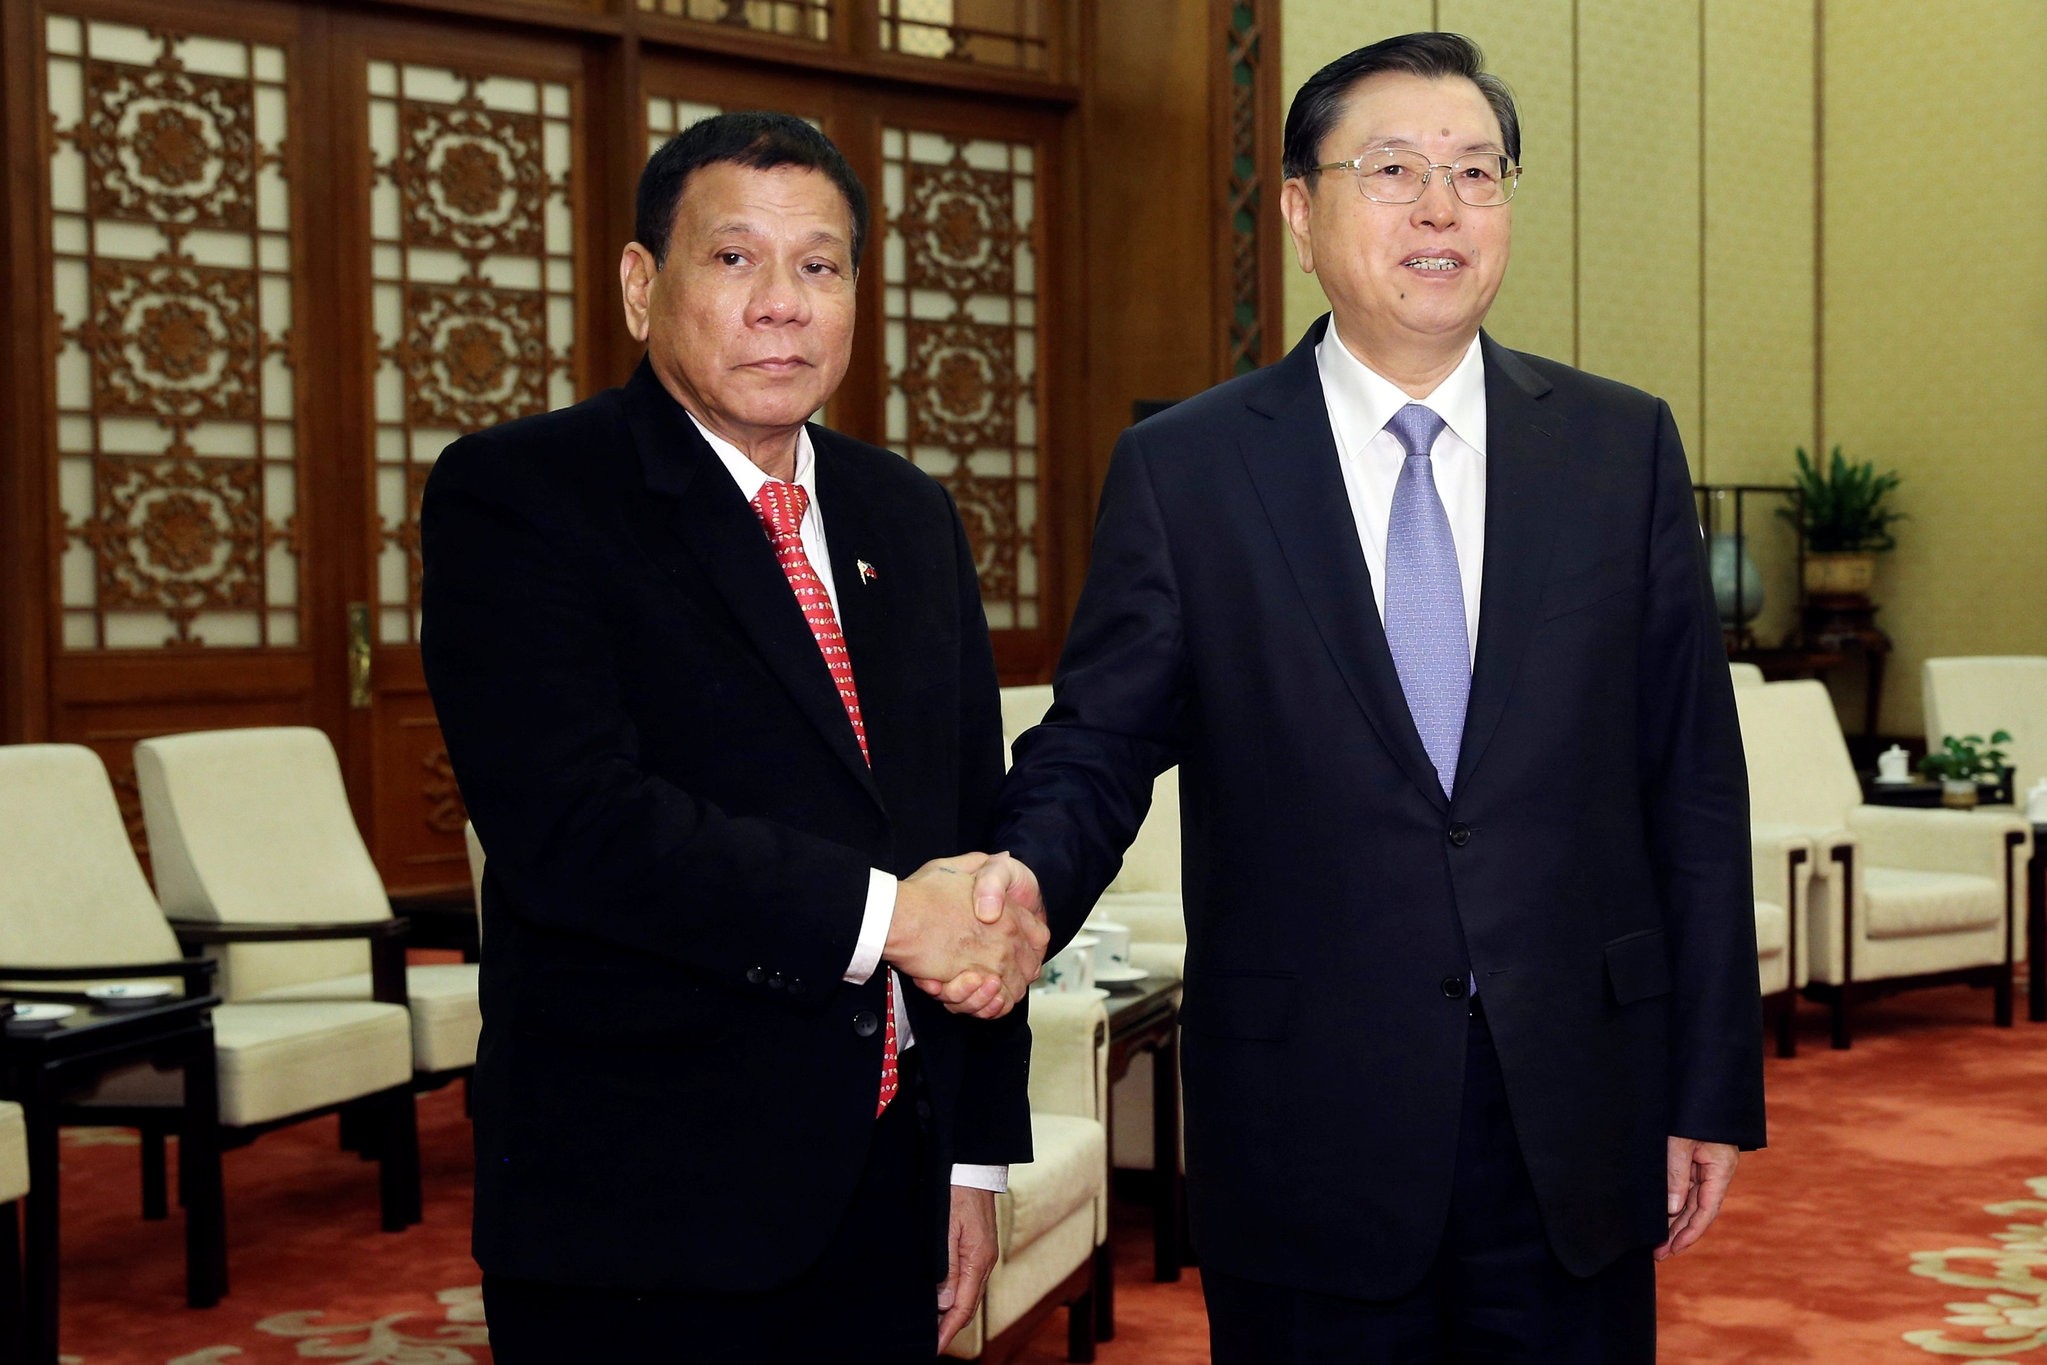 Philippines President Rodrigo Duterte (L) shakes hands with Zhang Dejiang, Chairman of the Standing Committee of the National People's Congress of China ahead of a meeting at the Great Hall of the People in Beijing, China, 20.10.2016. (Reuters Photo)